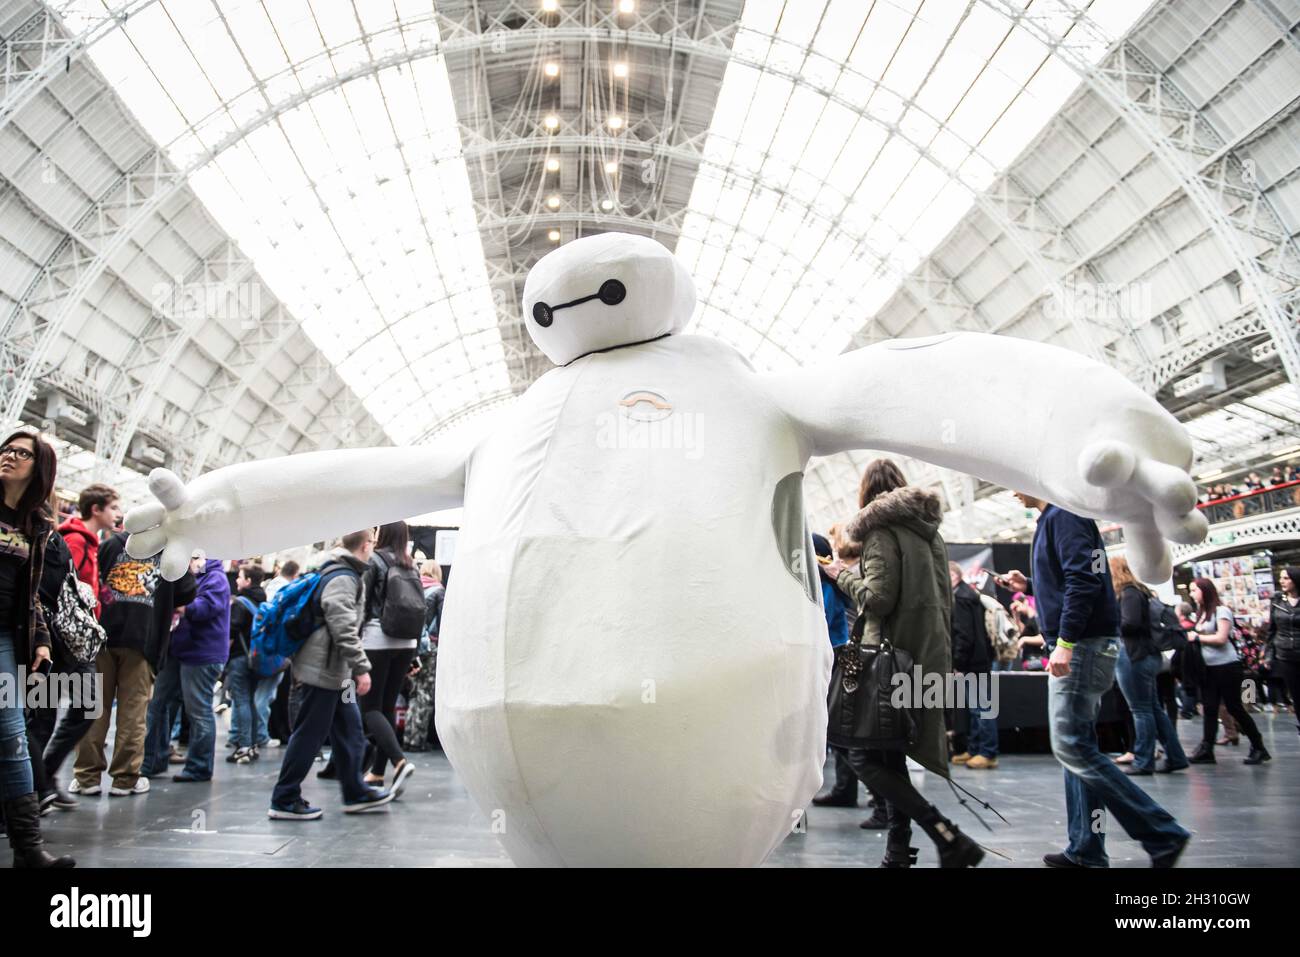 Cosplayer dressed as Baymax attends the Walker Stalker London 2016, at Olympia in London. Stock Photo